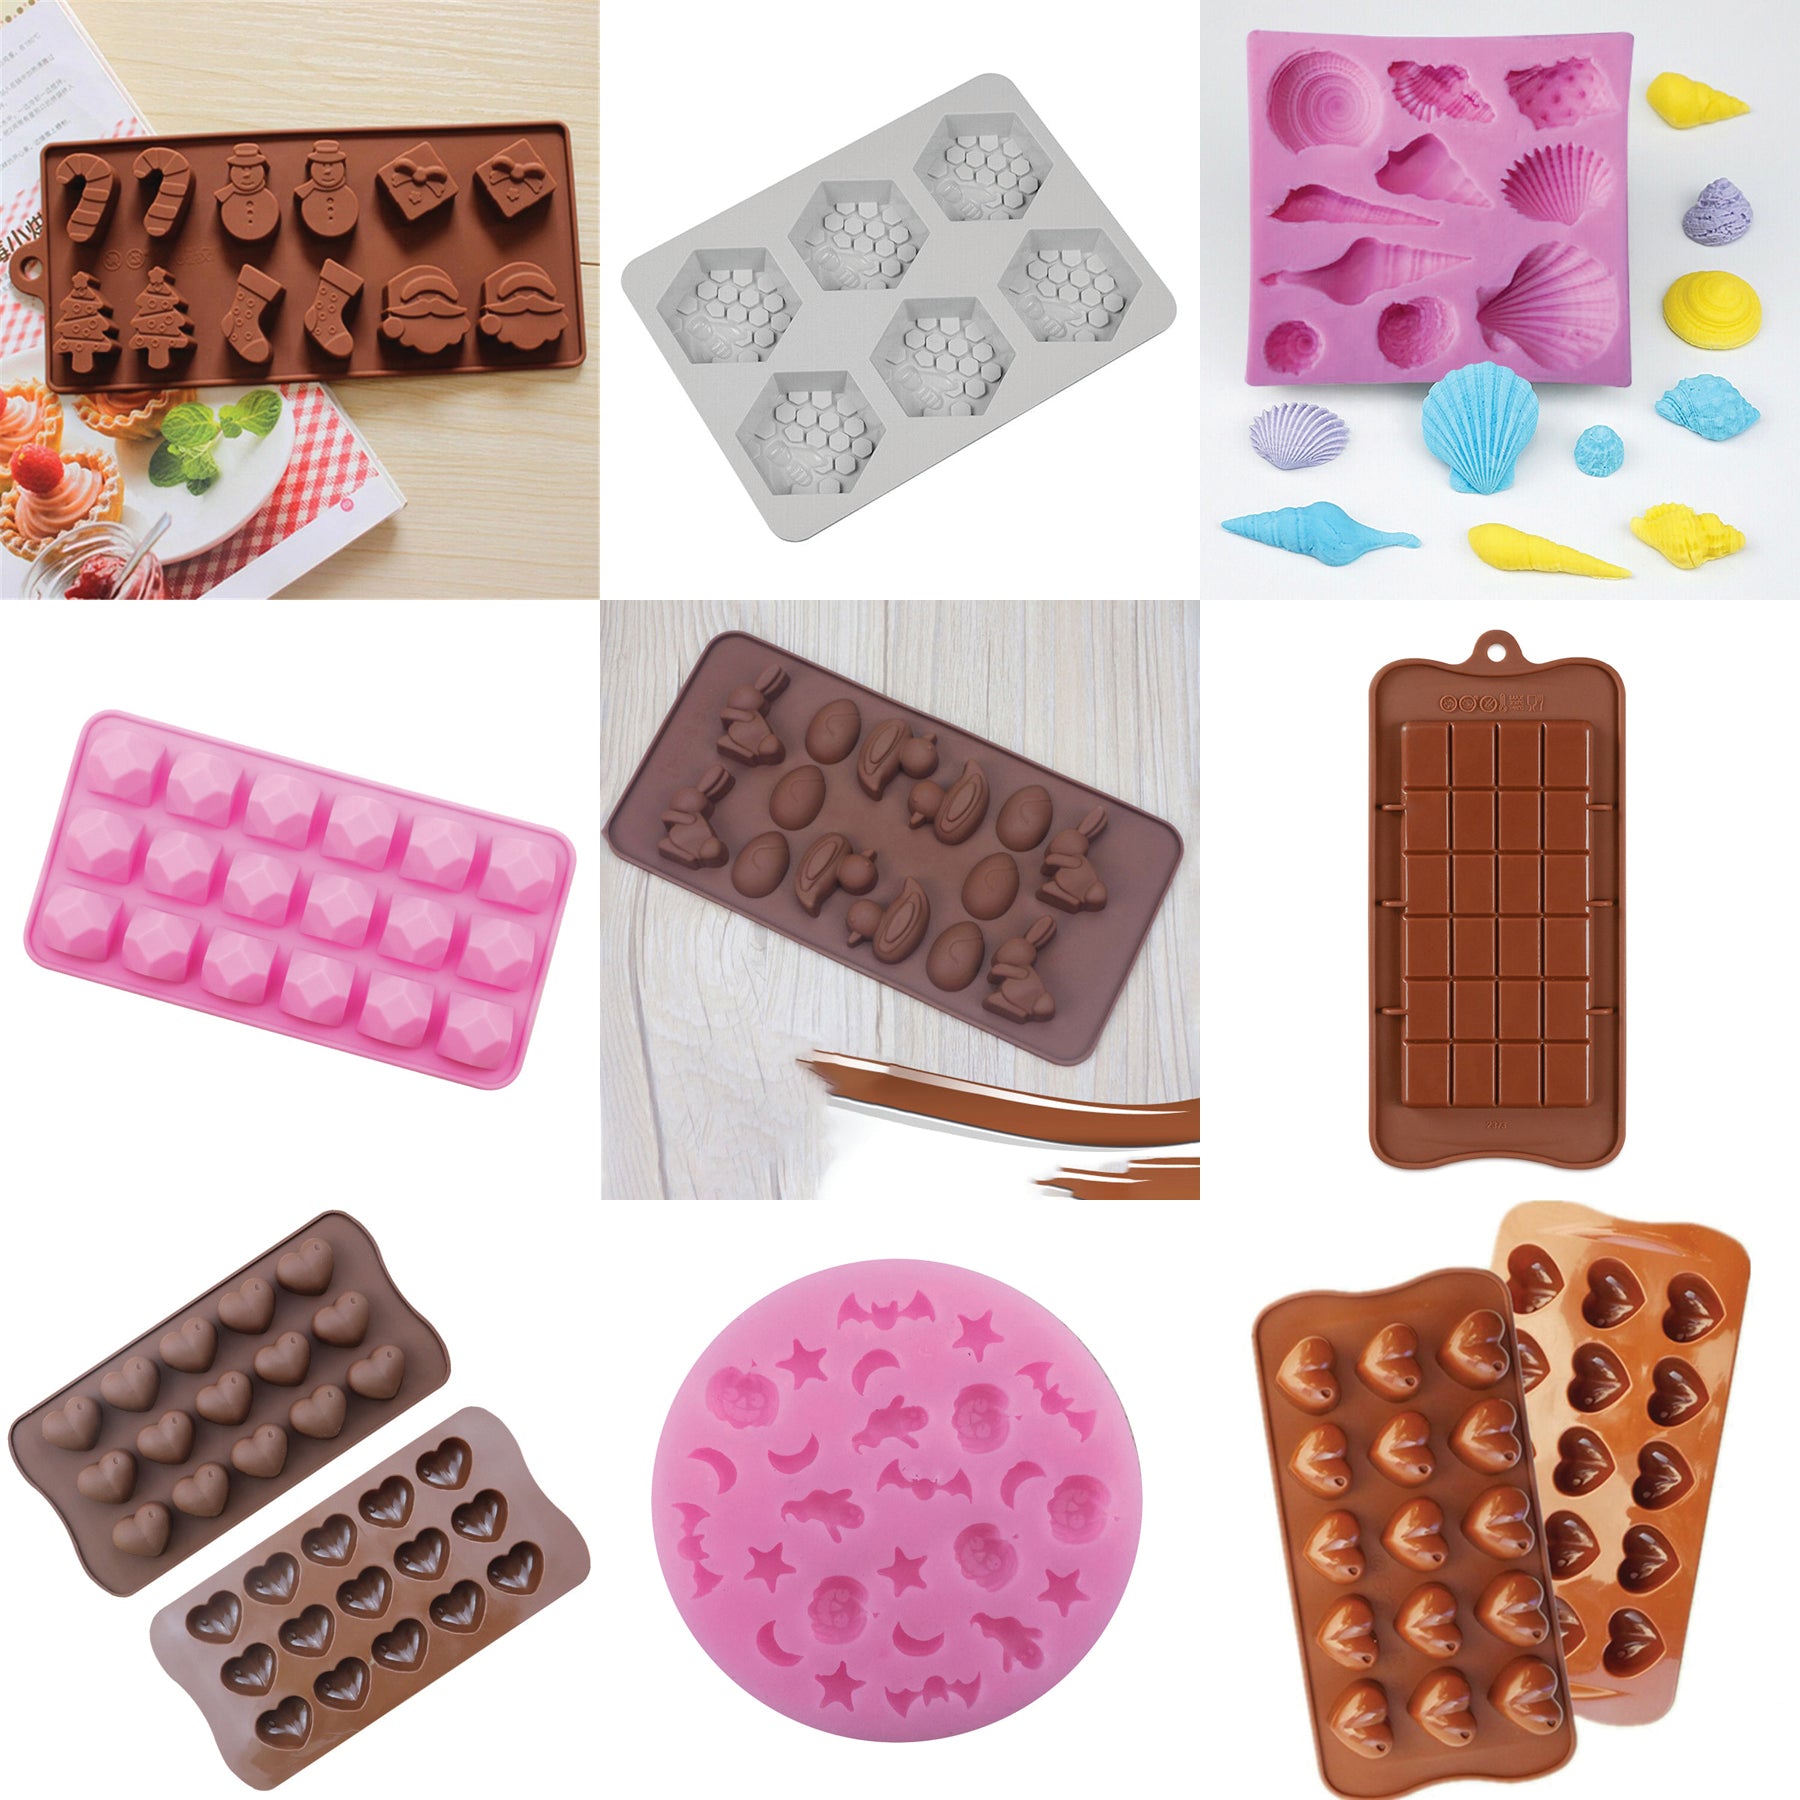 LiveMoor Silicone Melt Moulds - Various Styles